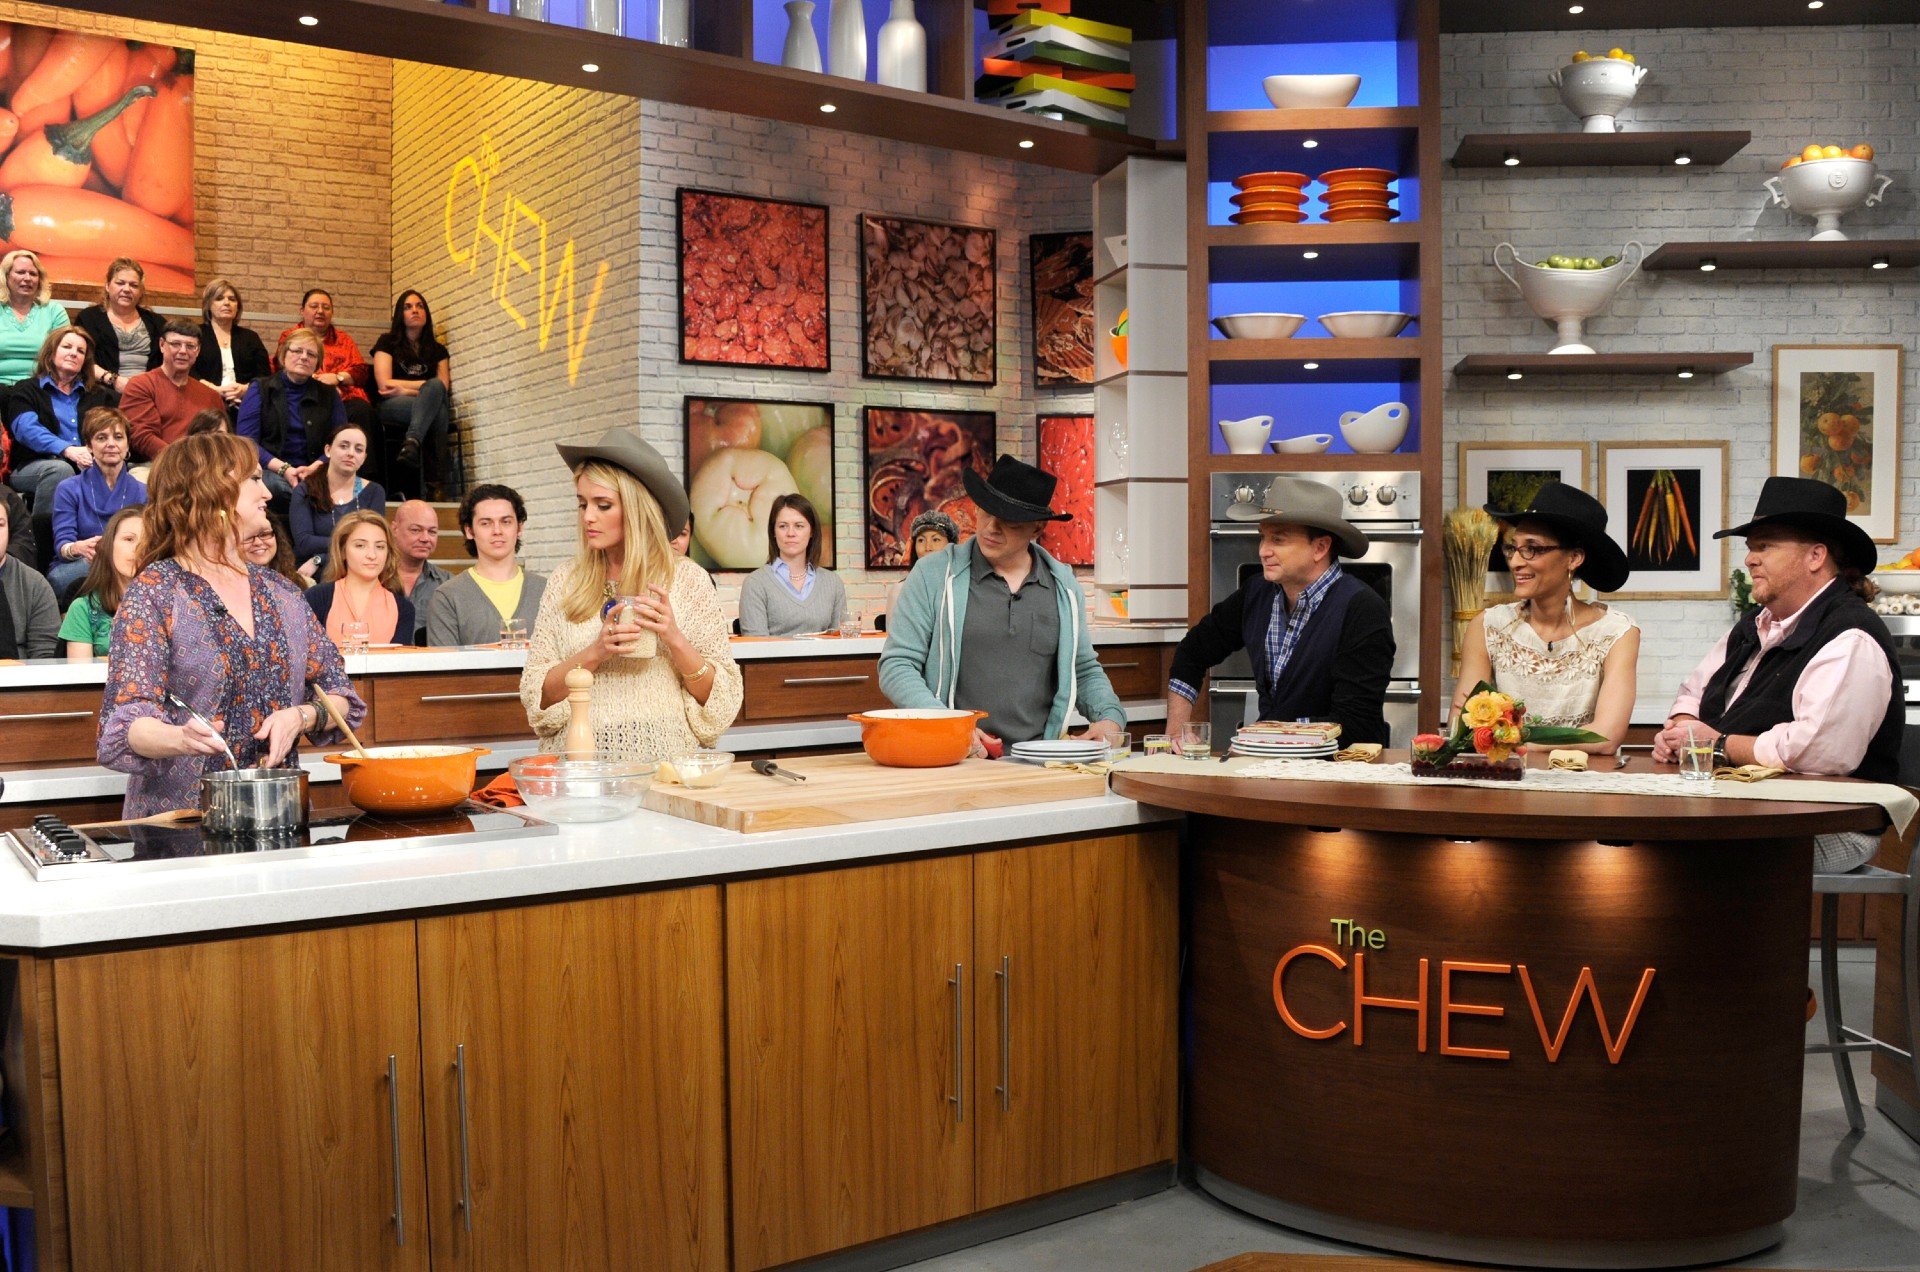 The Pioneer Woman Ree Drummond makes a meal on The Chew with Daphne Oz and the rest of the hosts.